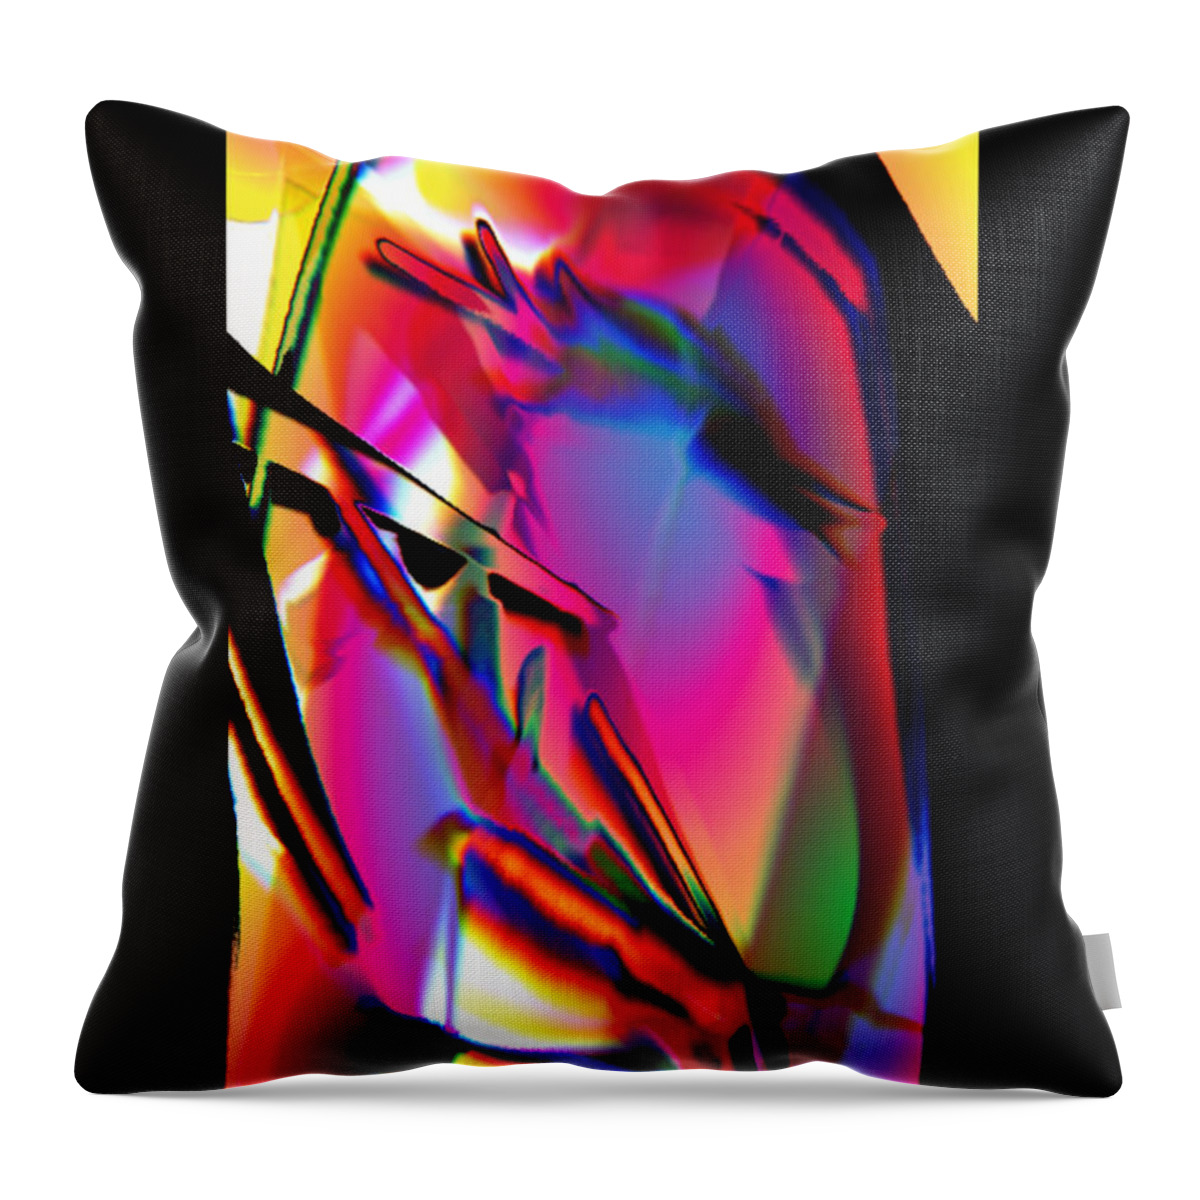 Homepage Throw Pillow featuring the digital art Abstract #3 by Yvonne Padmos